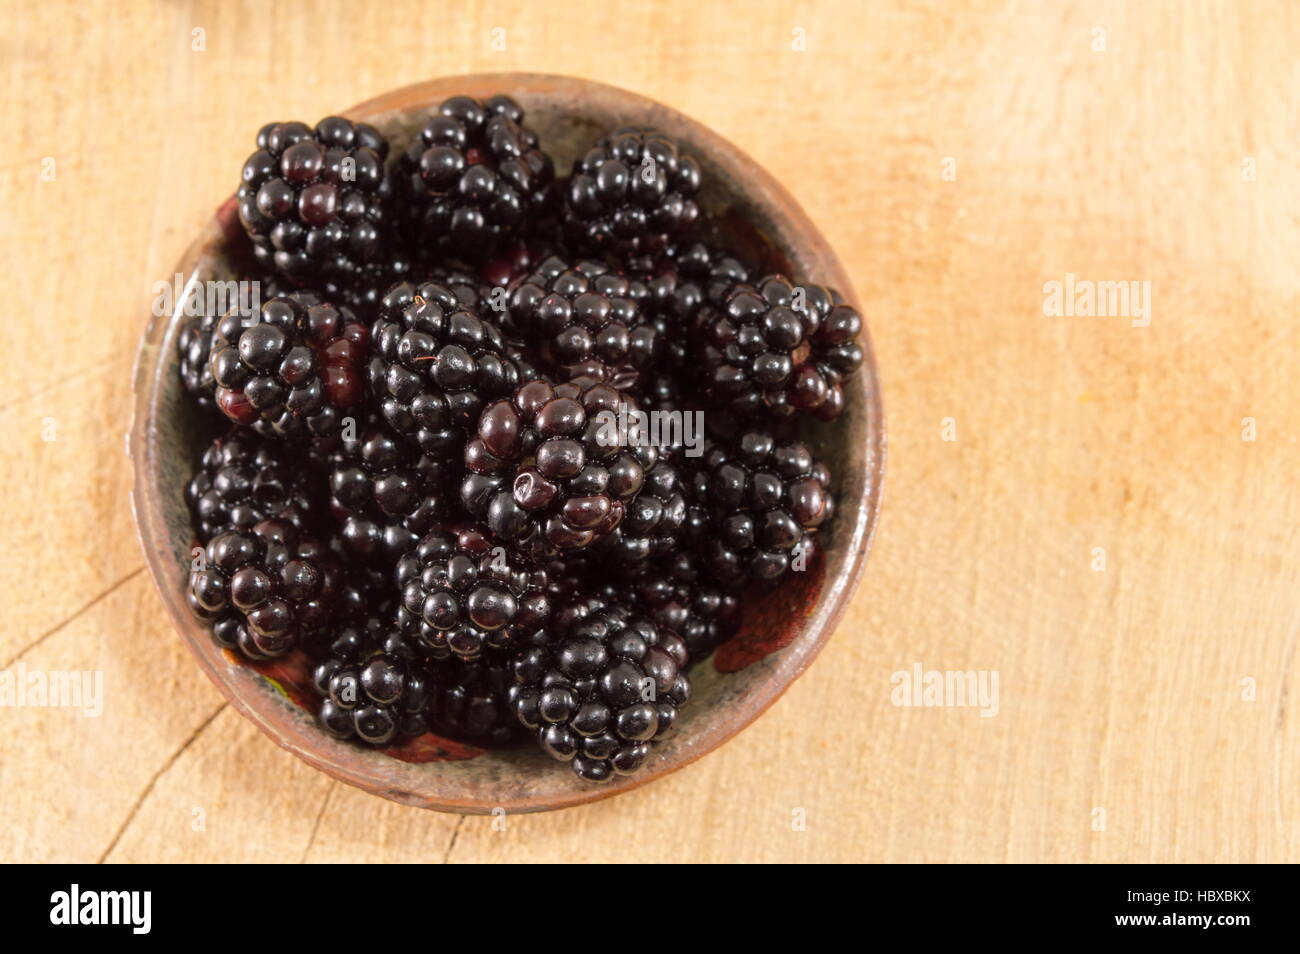 bunch of fresh juicy blackberries on a plate Stock Photo